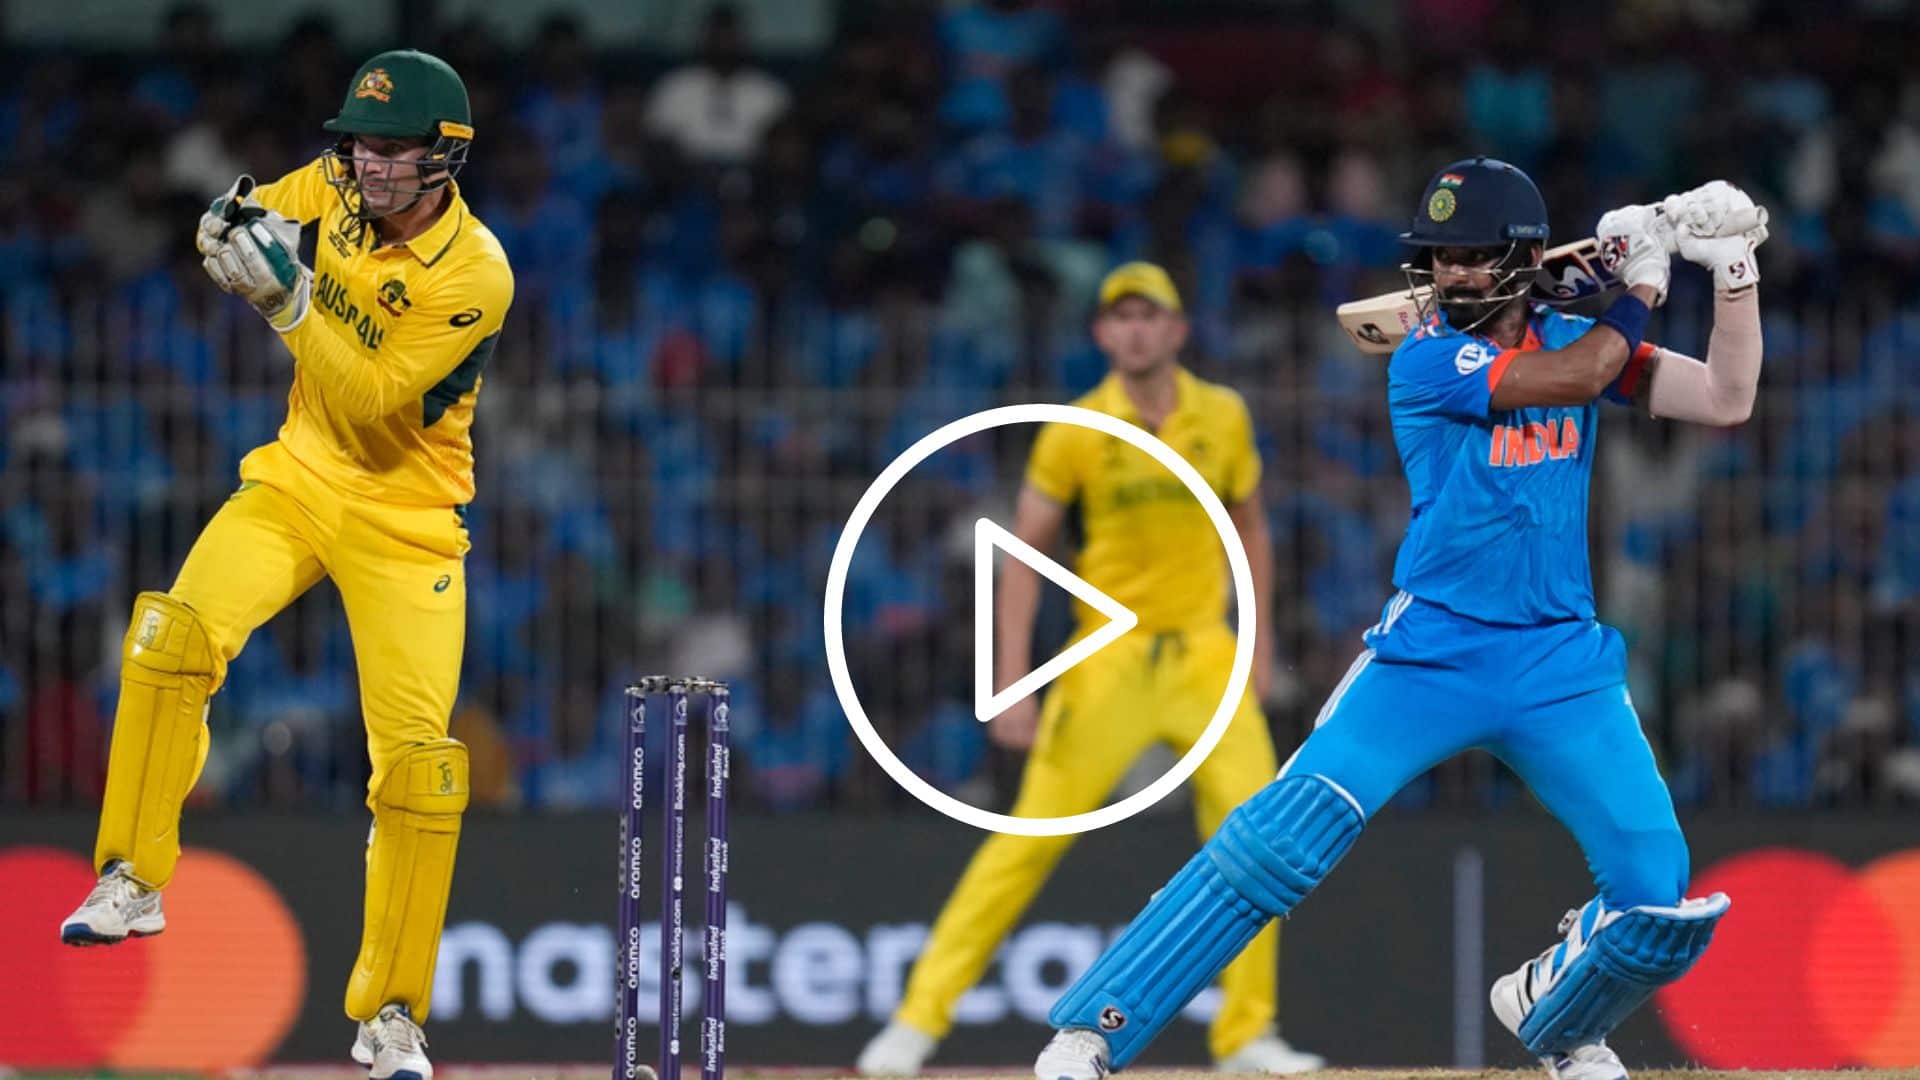 [Watch] KL Rahul Delivers Classy Fifty Under Pressure Against A Rampant Aussie Attack